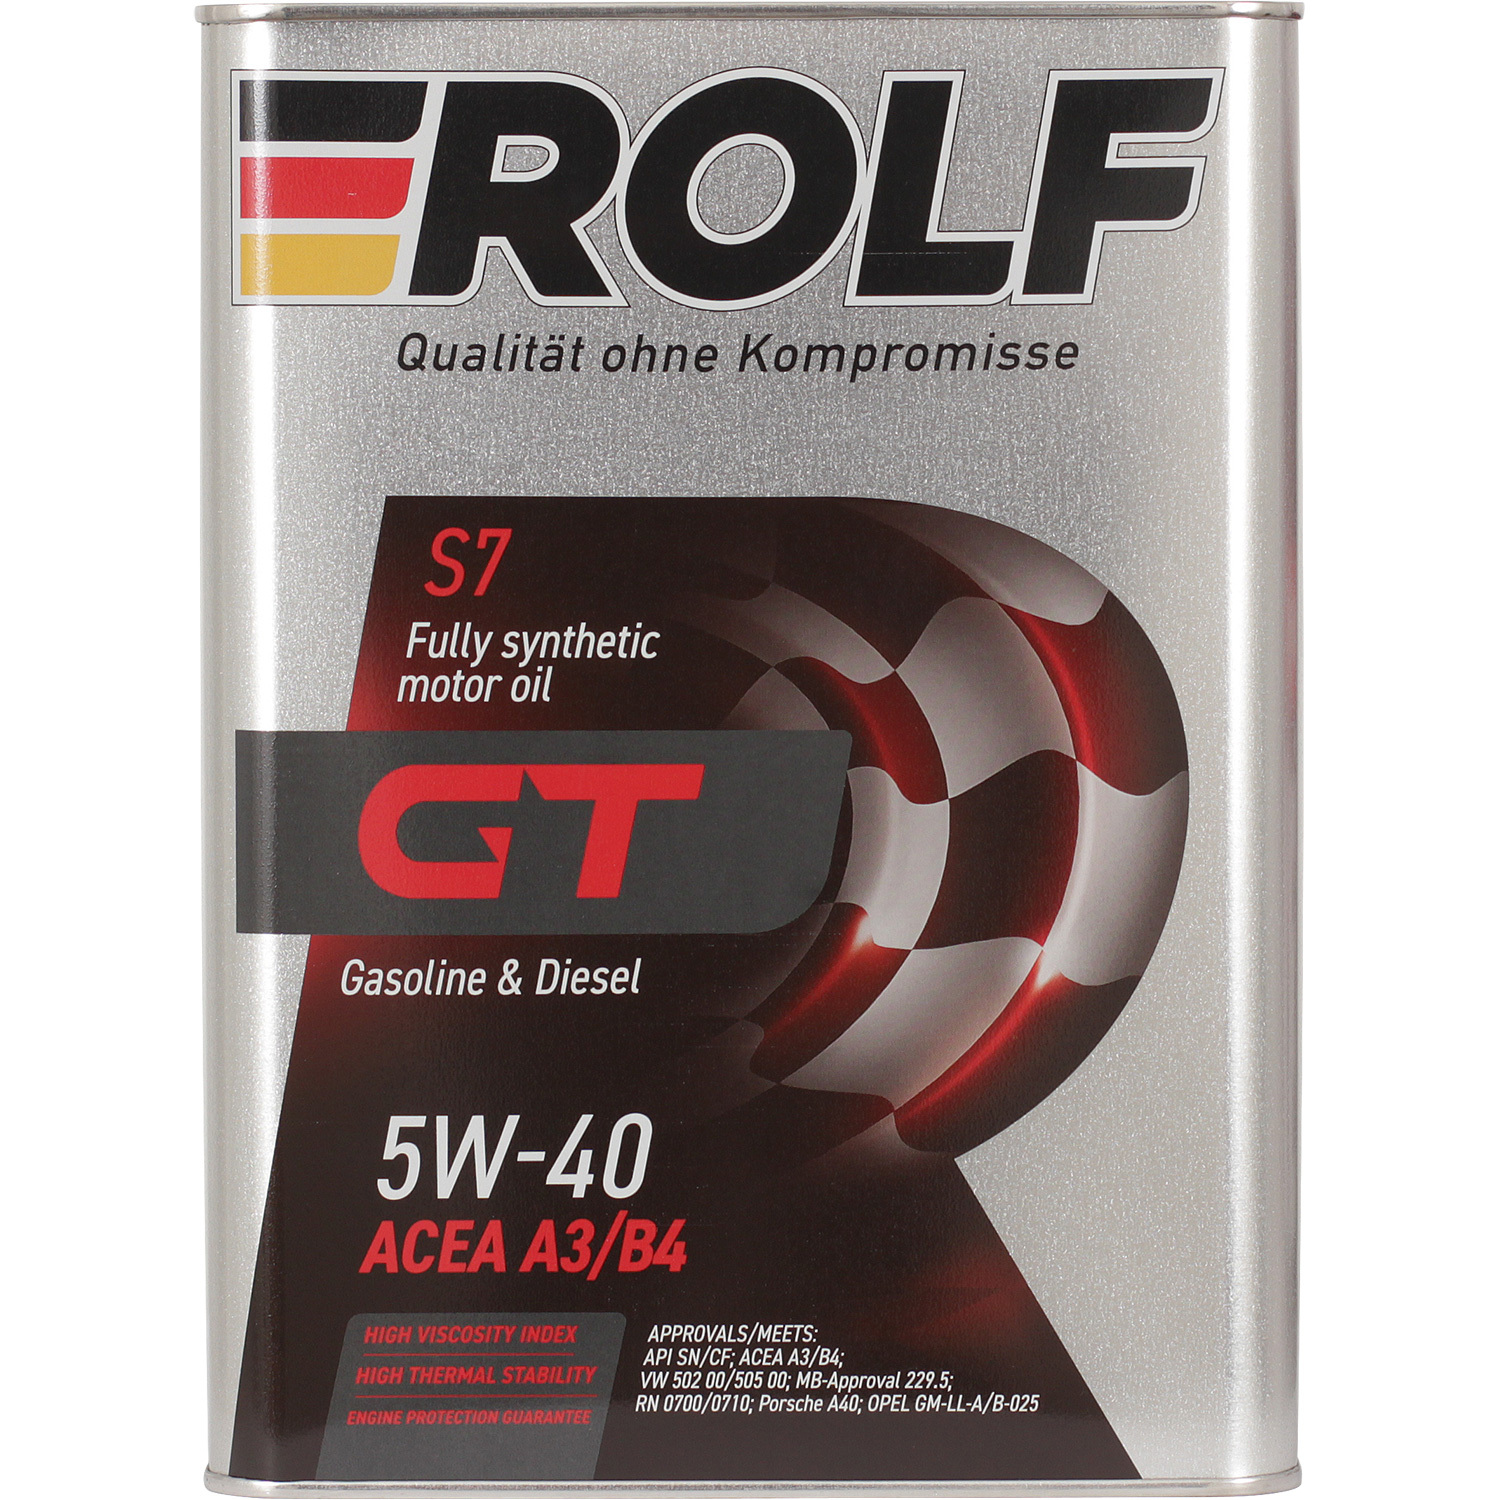 Rolf Моторное масло Rolf GT 5W-40, 4 л rolf моторное масло rolf gt 5w 40 1 л